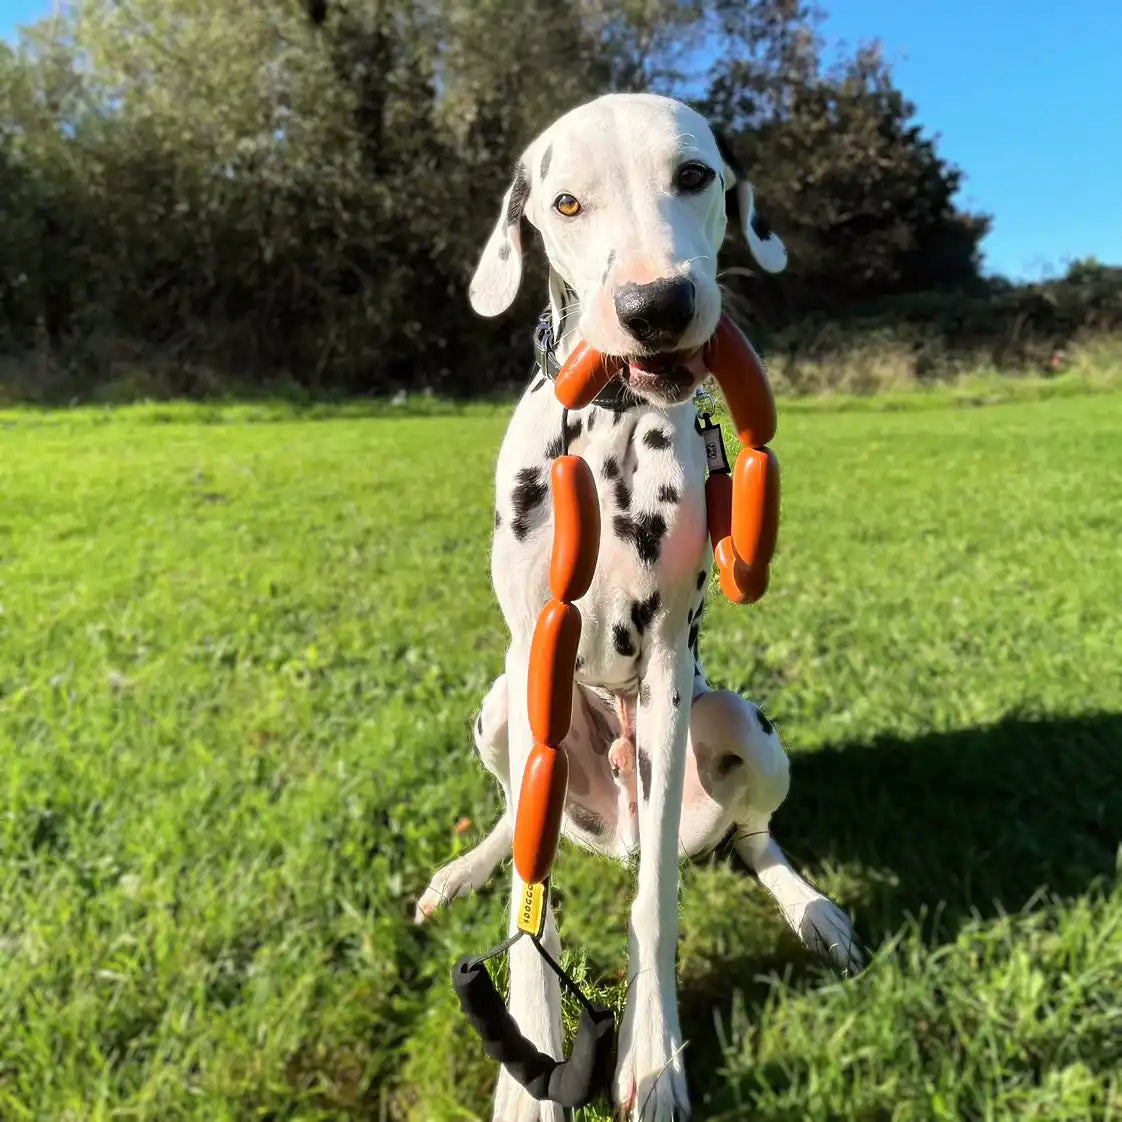 Love how this Dalmatian dog is holding our 4Doggo sausage leash in his mouth!